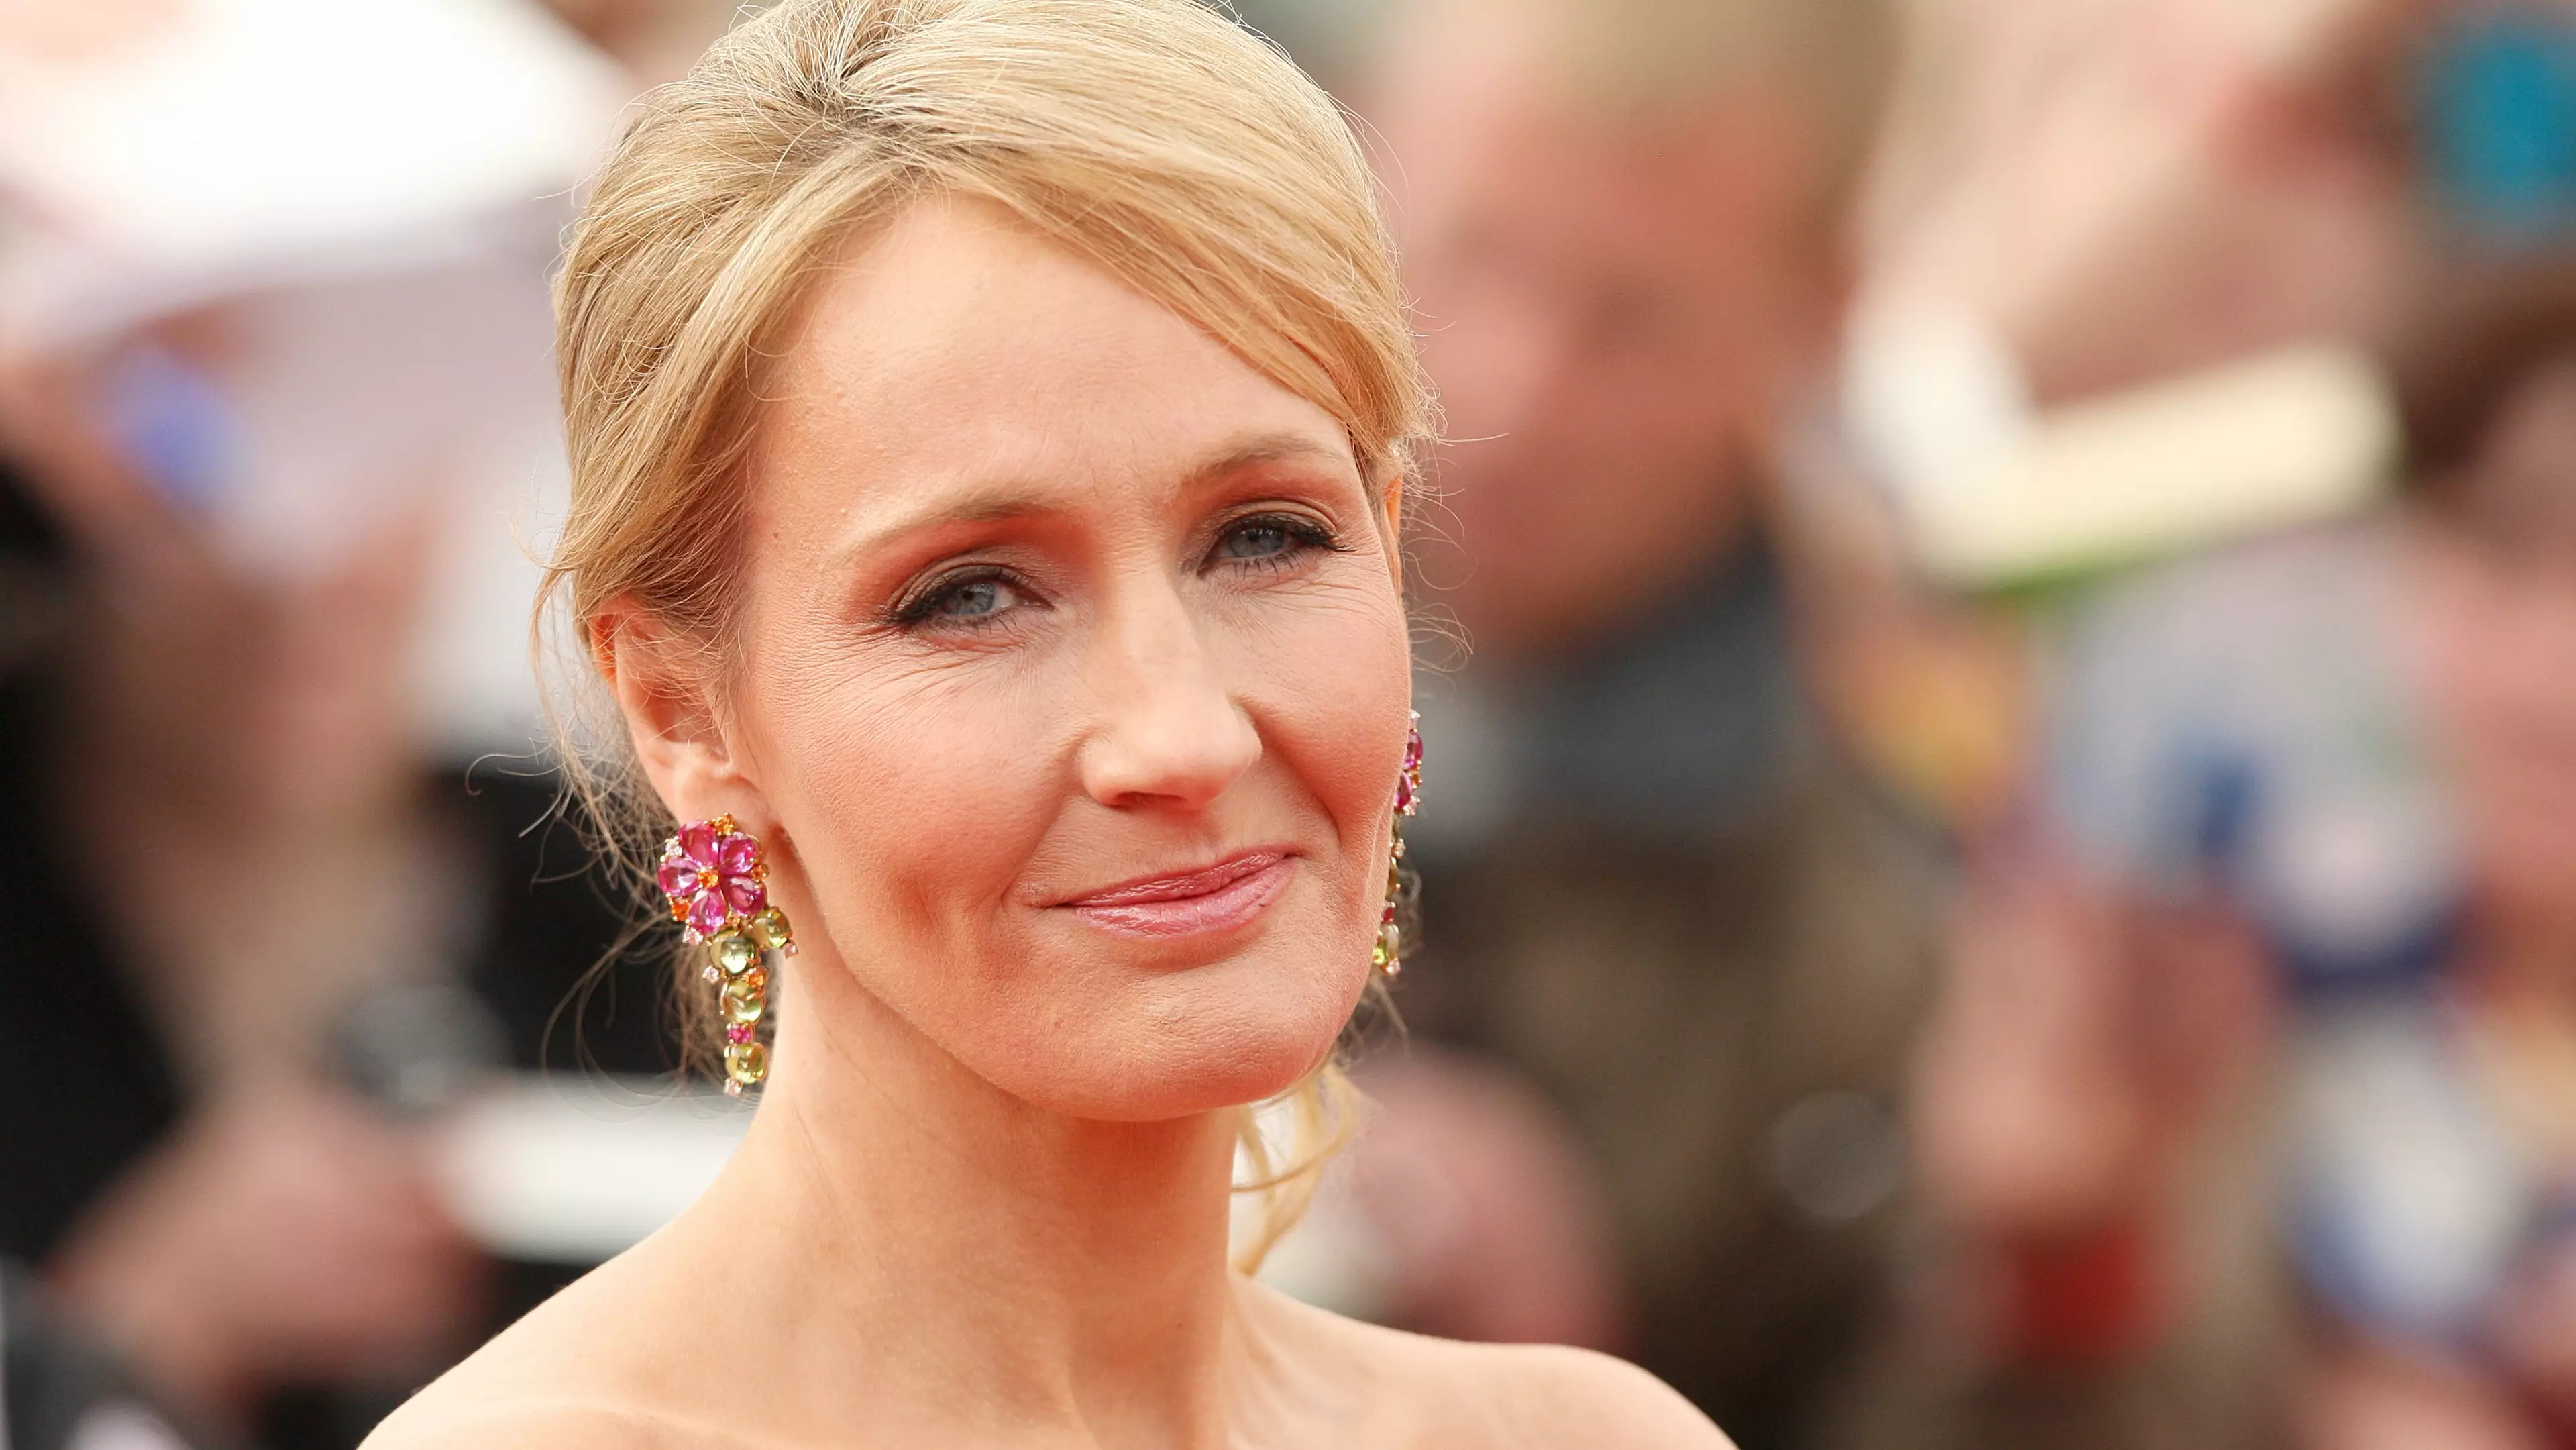 J.K. Rowling Offers To Pay Rogue Civil Servant A Year's Wages